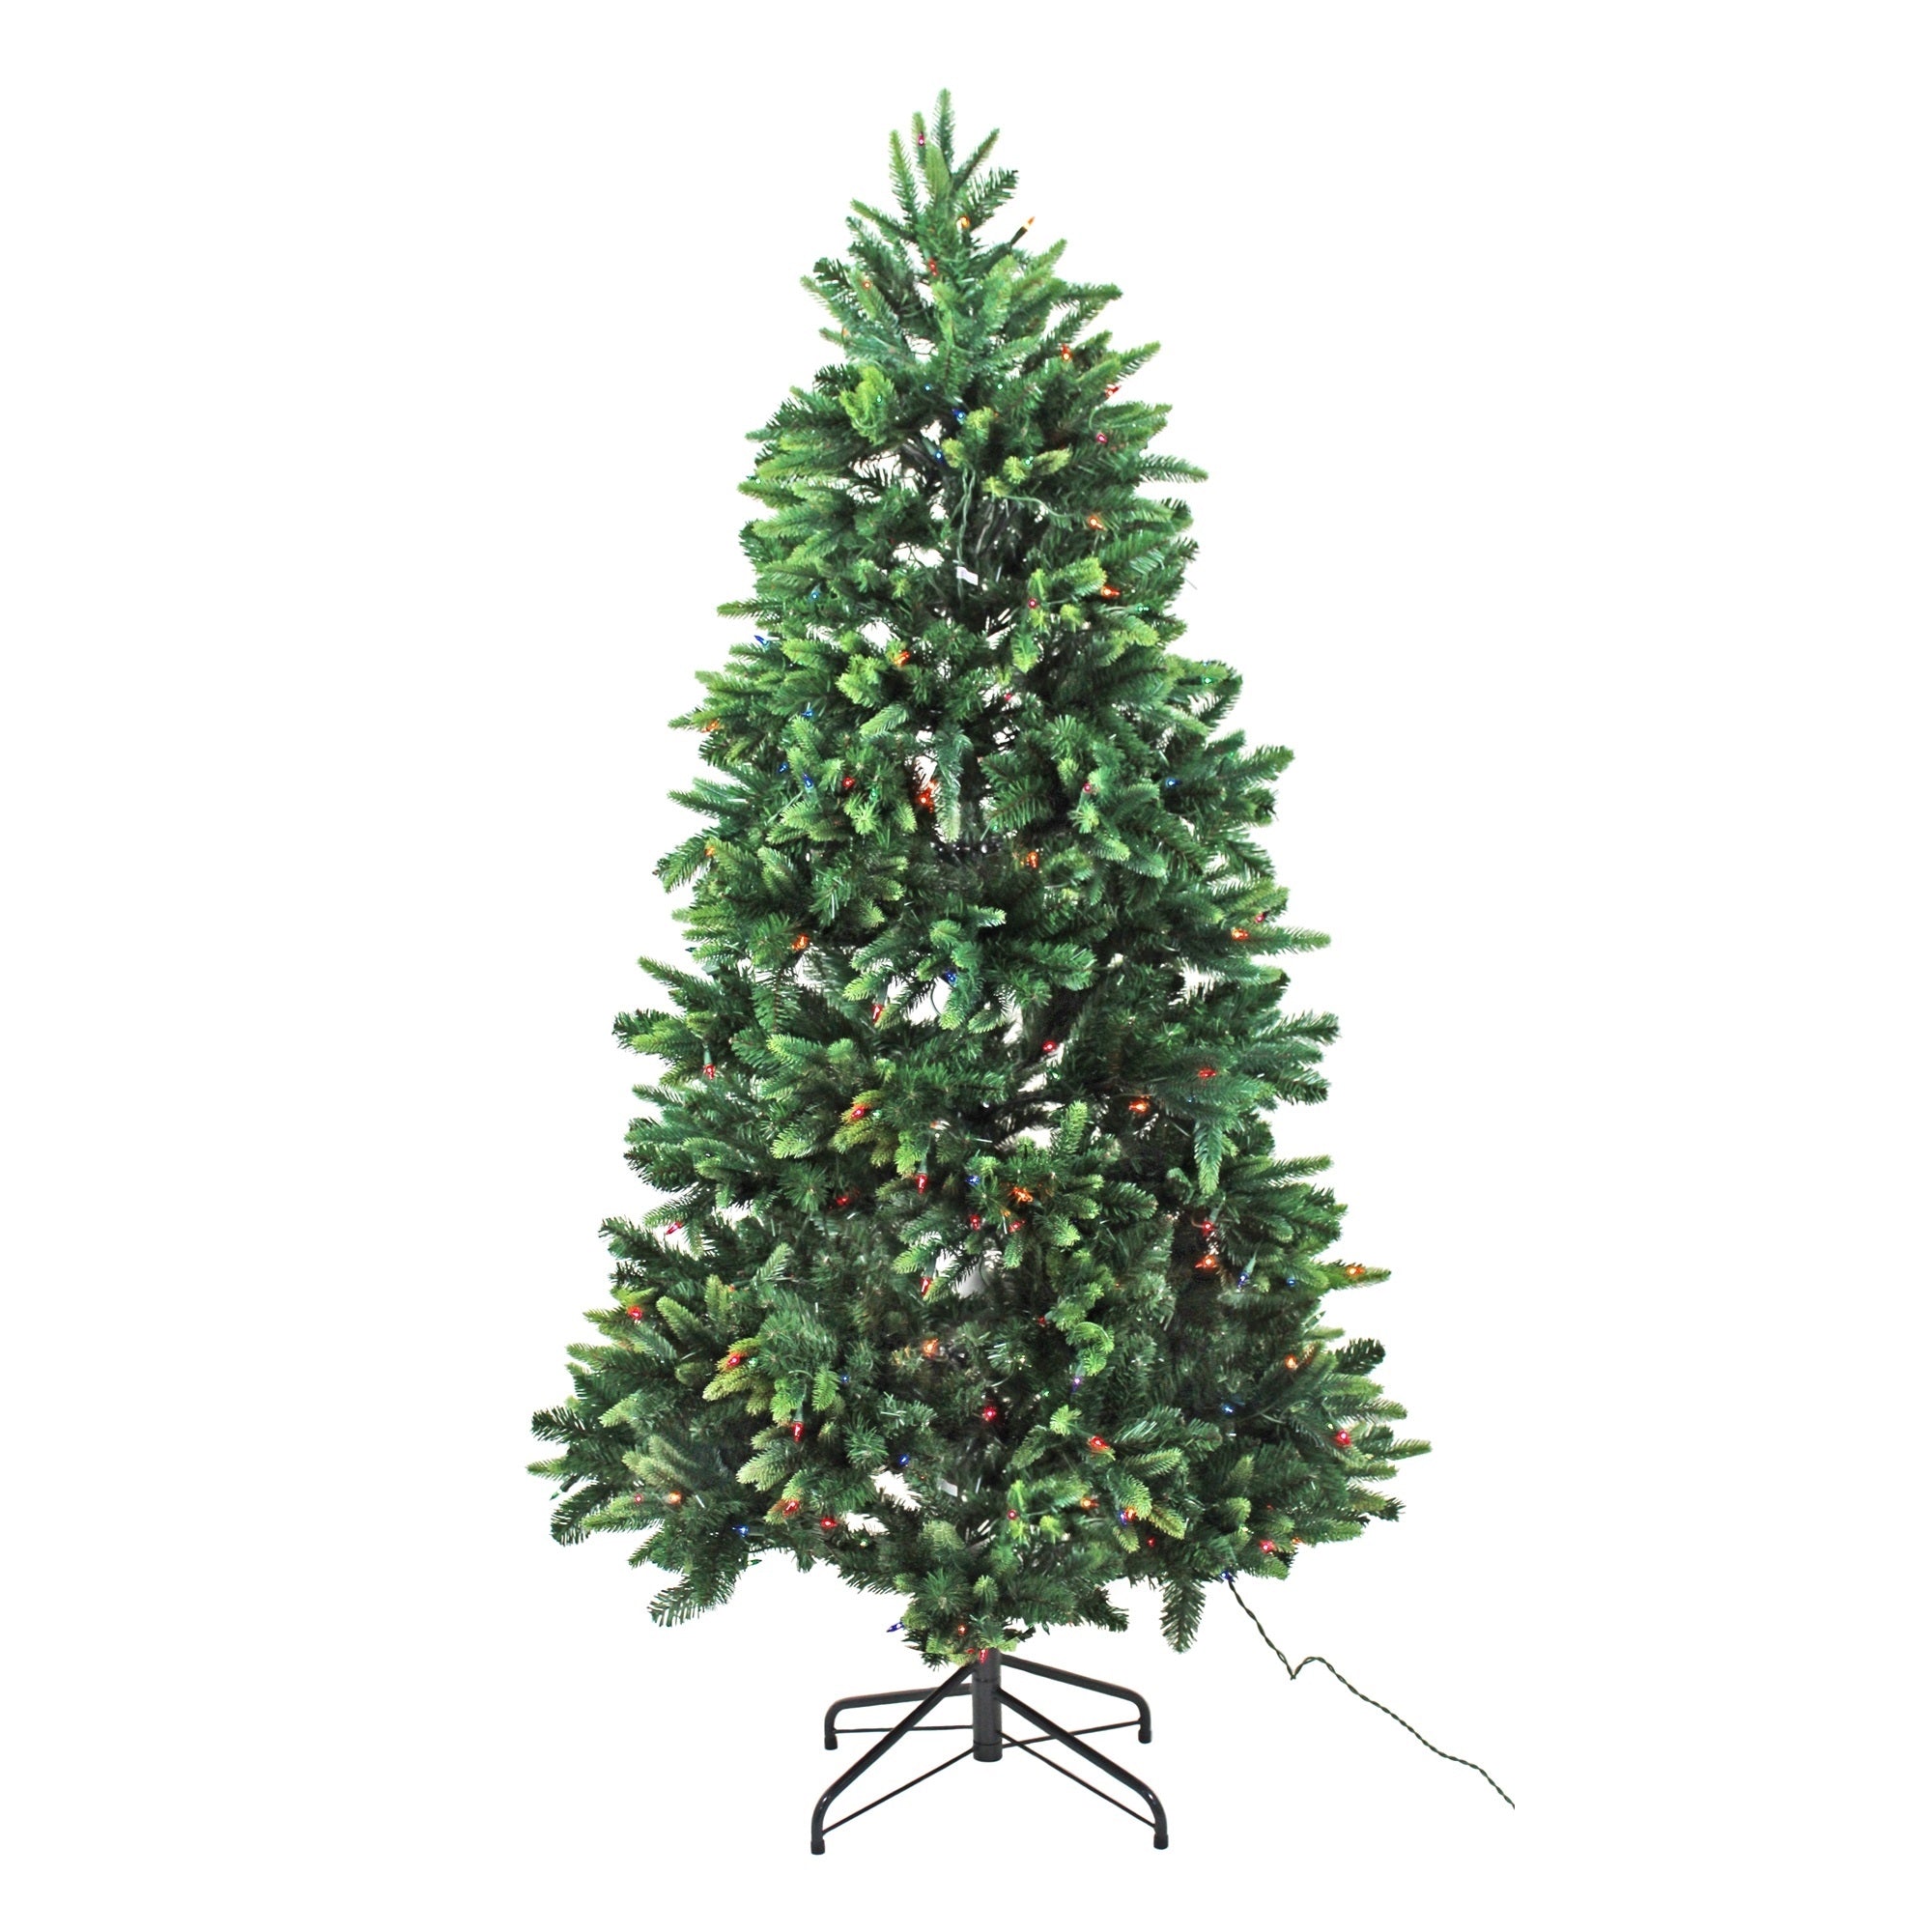 Lapland Artificial Christmas Tree, 350 Multi-Colored Lights, Green, 6 Feet Tall